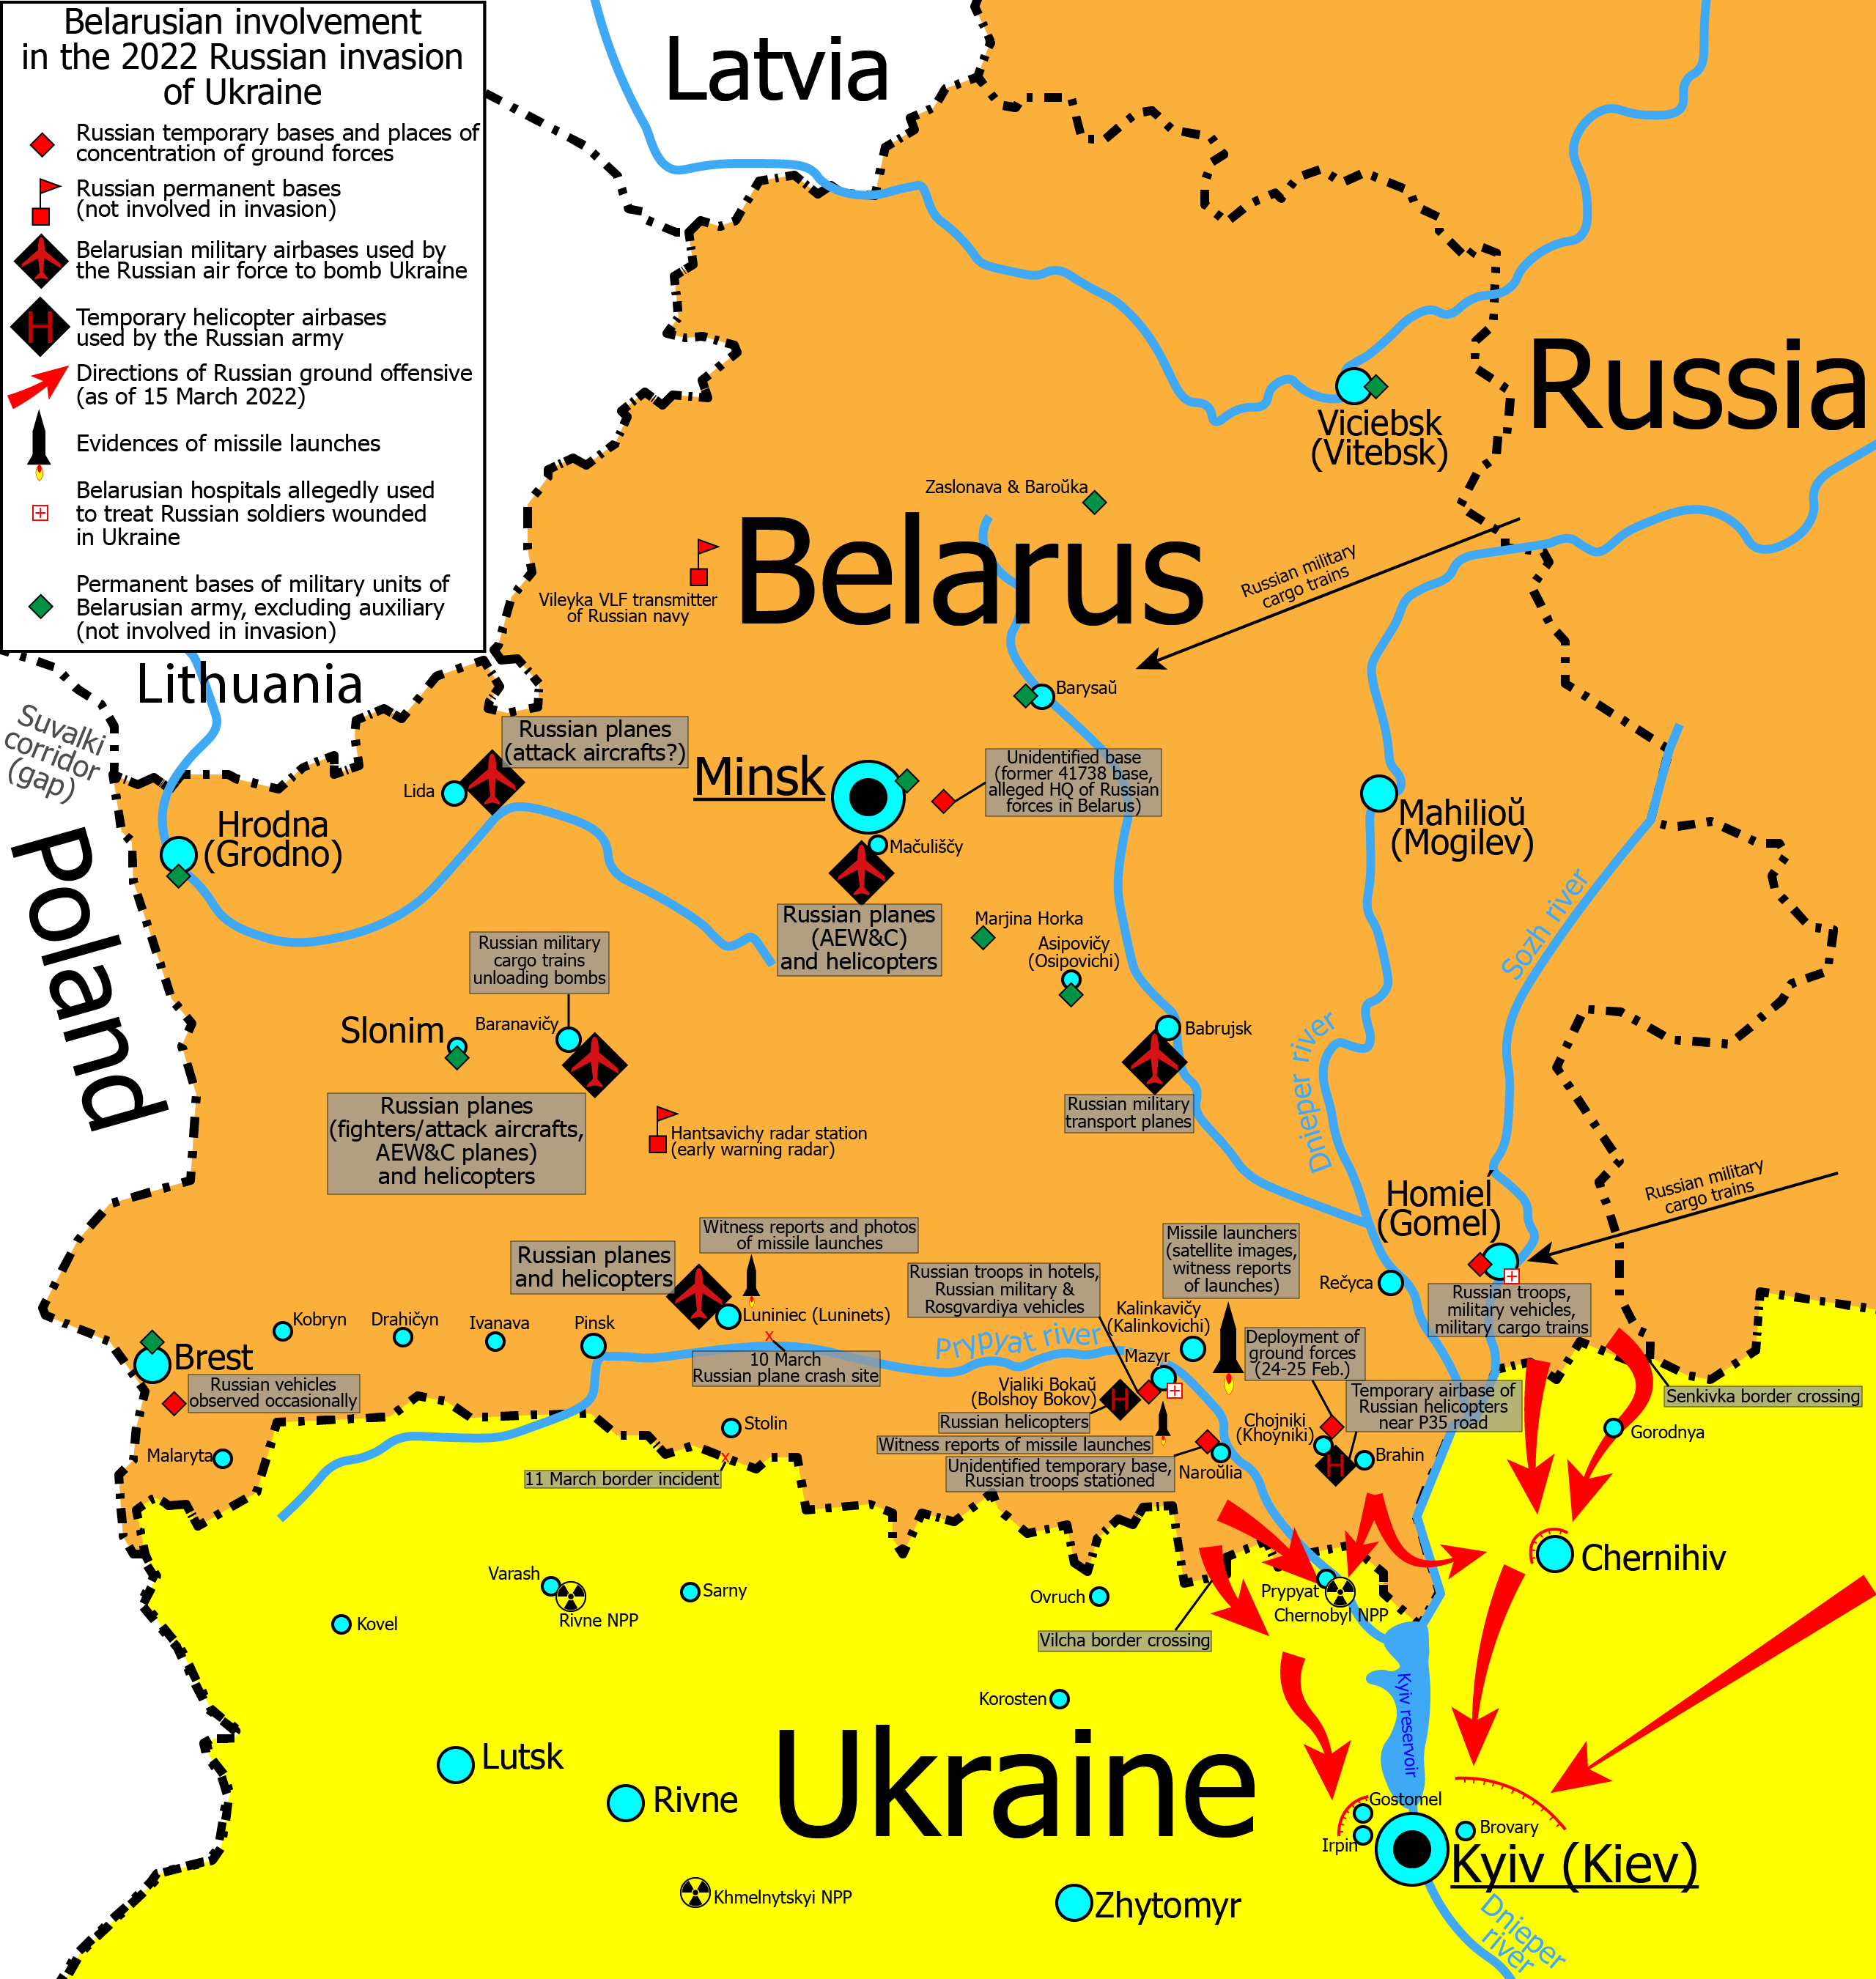 Map of Russian military activities in Belarus as of 15 March 2022. Credit: Wikipedia ~